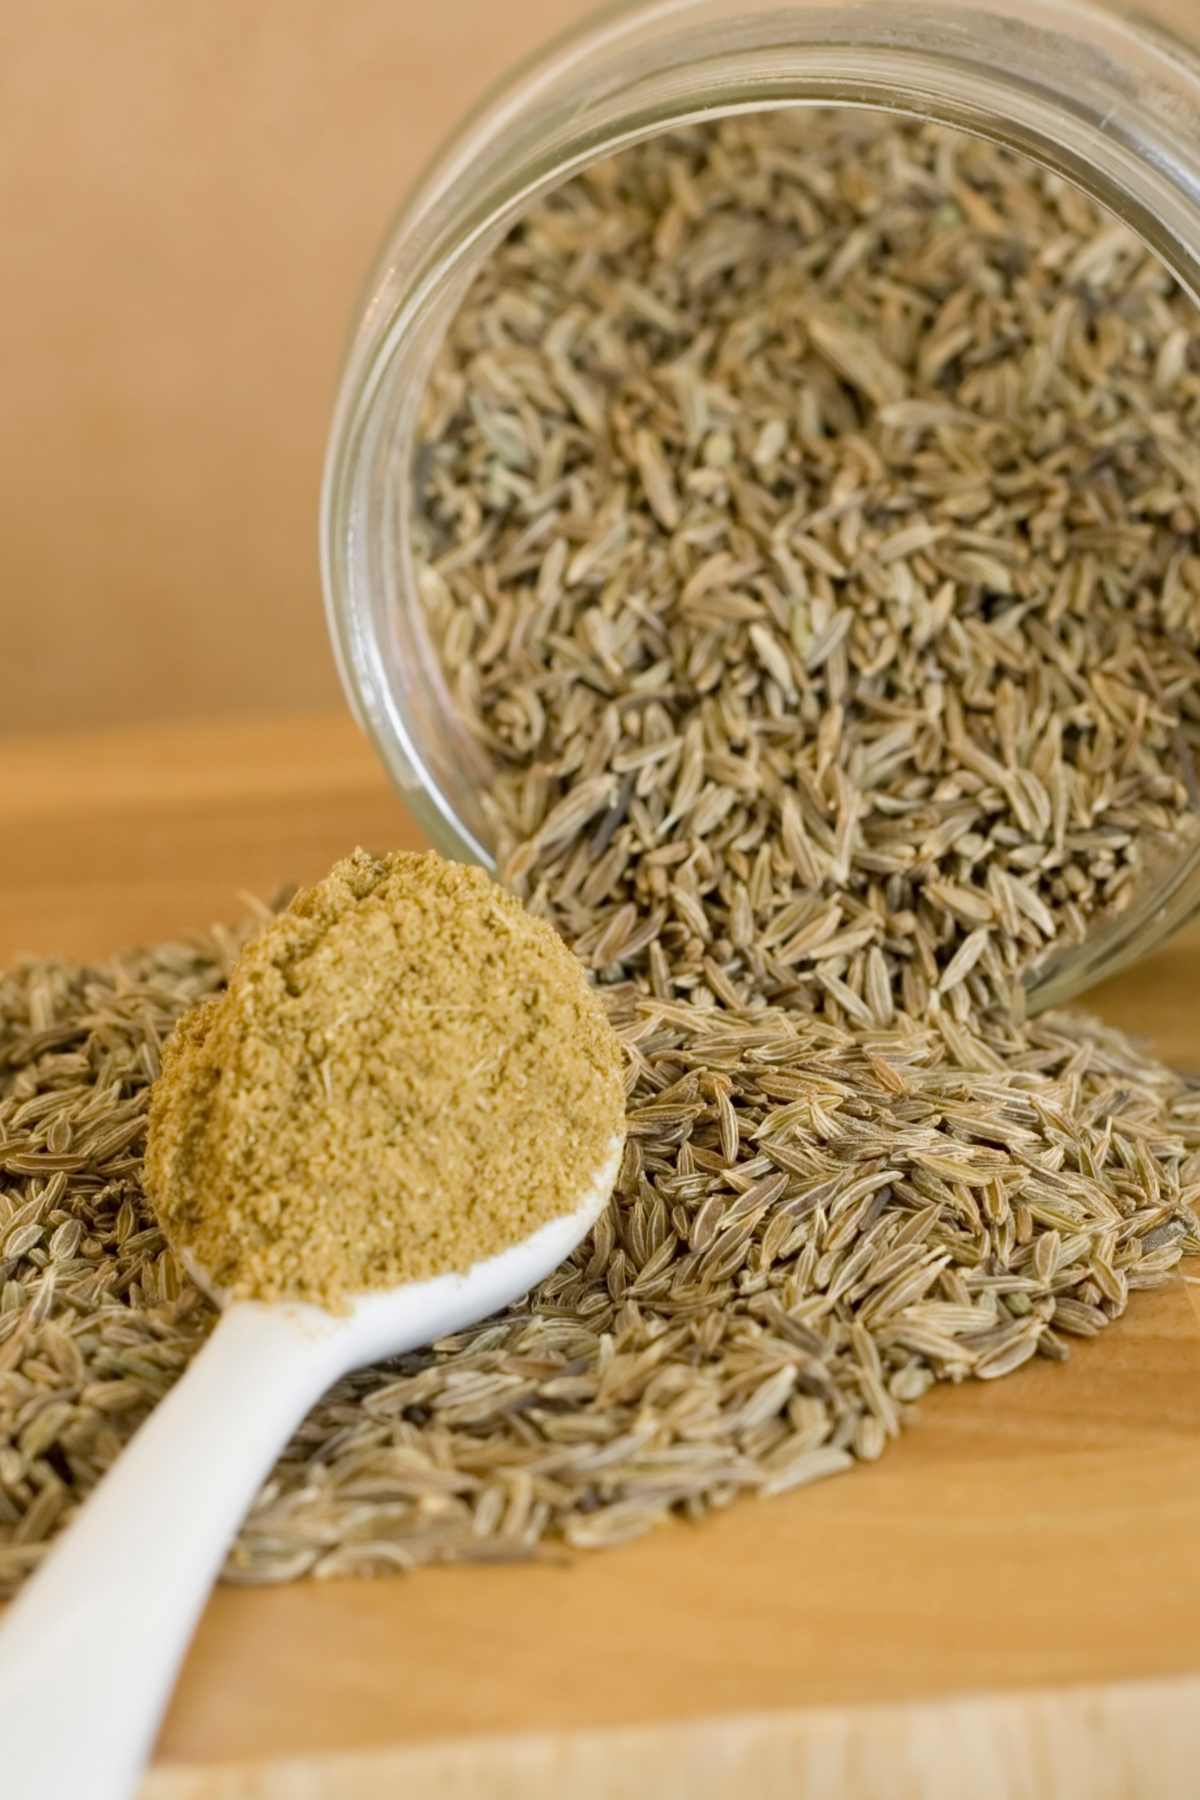 Cumin is a versatile spice you’d want to keep on your shelf. It’s nutty with hints of fresh citrus, and will easily take your dish to the next level. But what happens when you run out? You don’t have to panic, just take a deep breath and realize there are some great cumin substitutes.